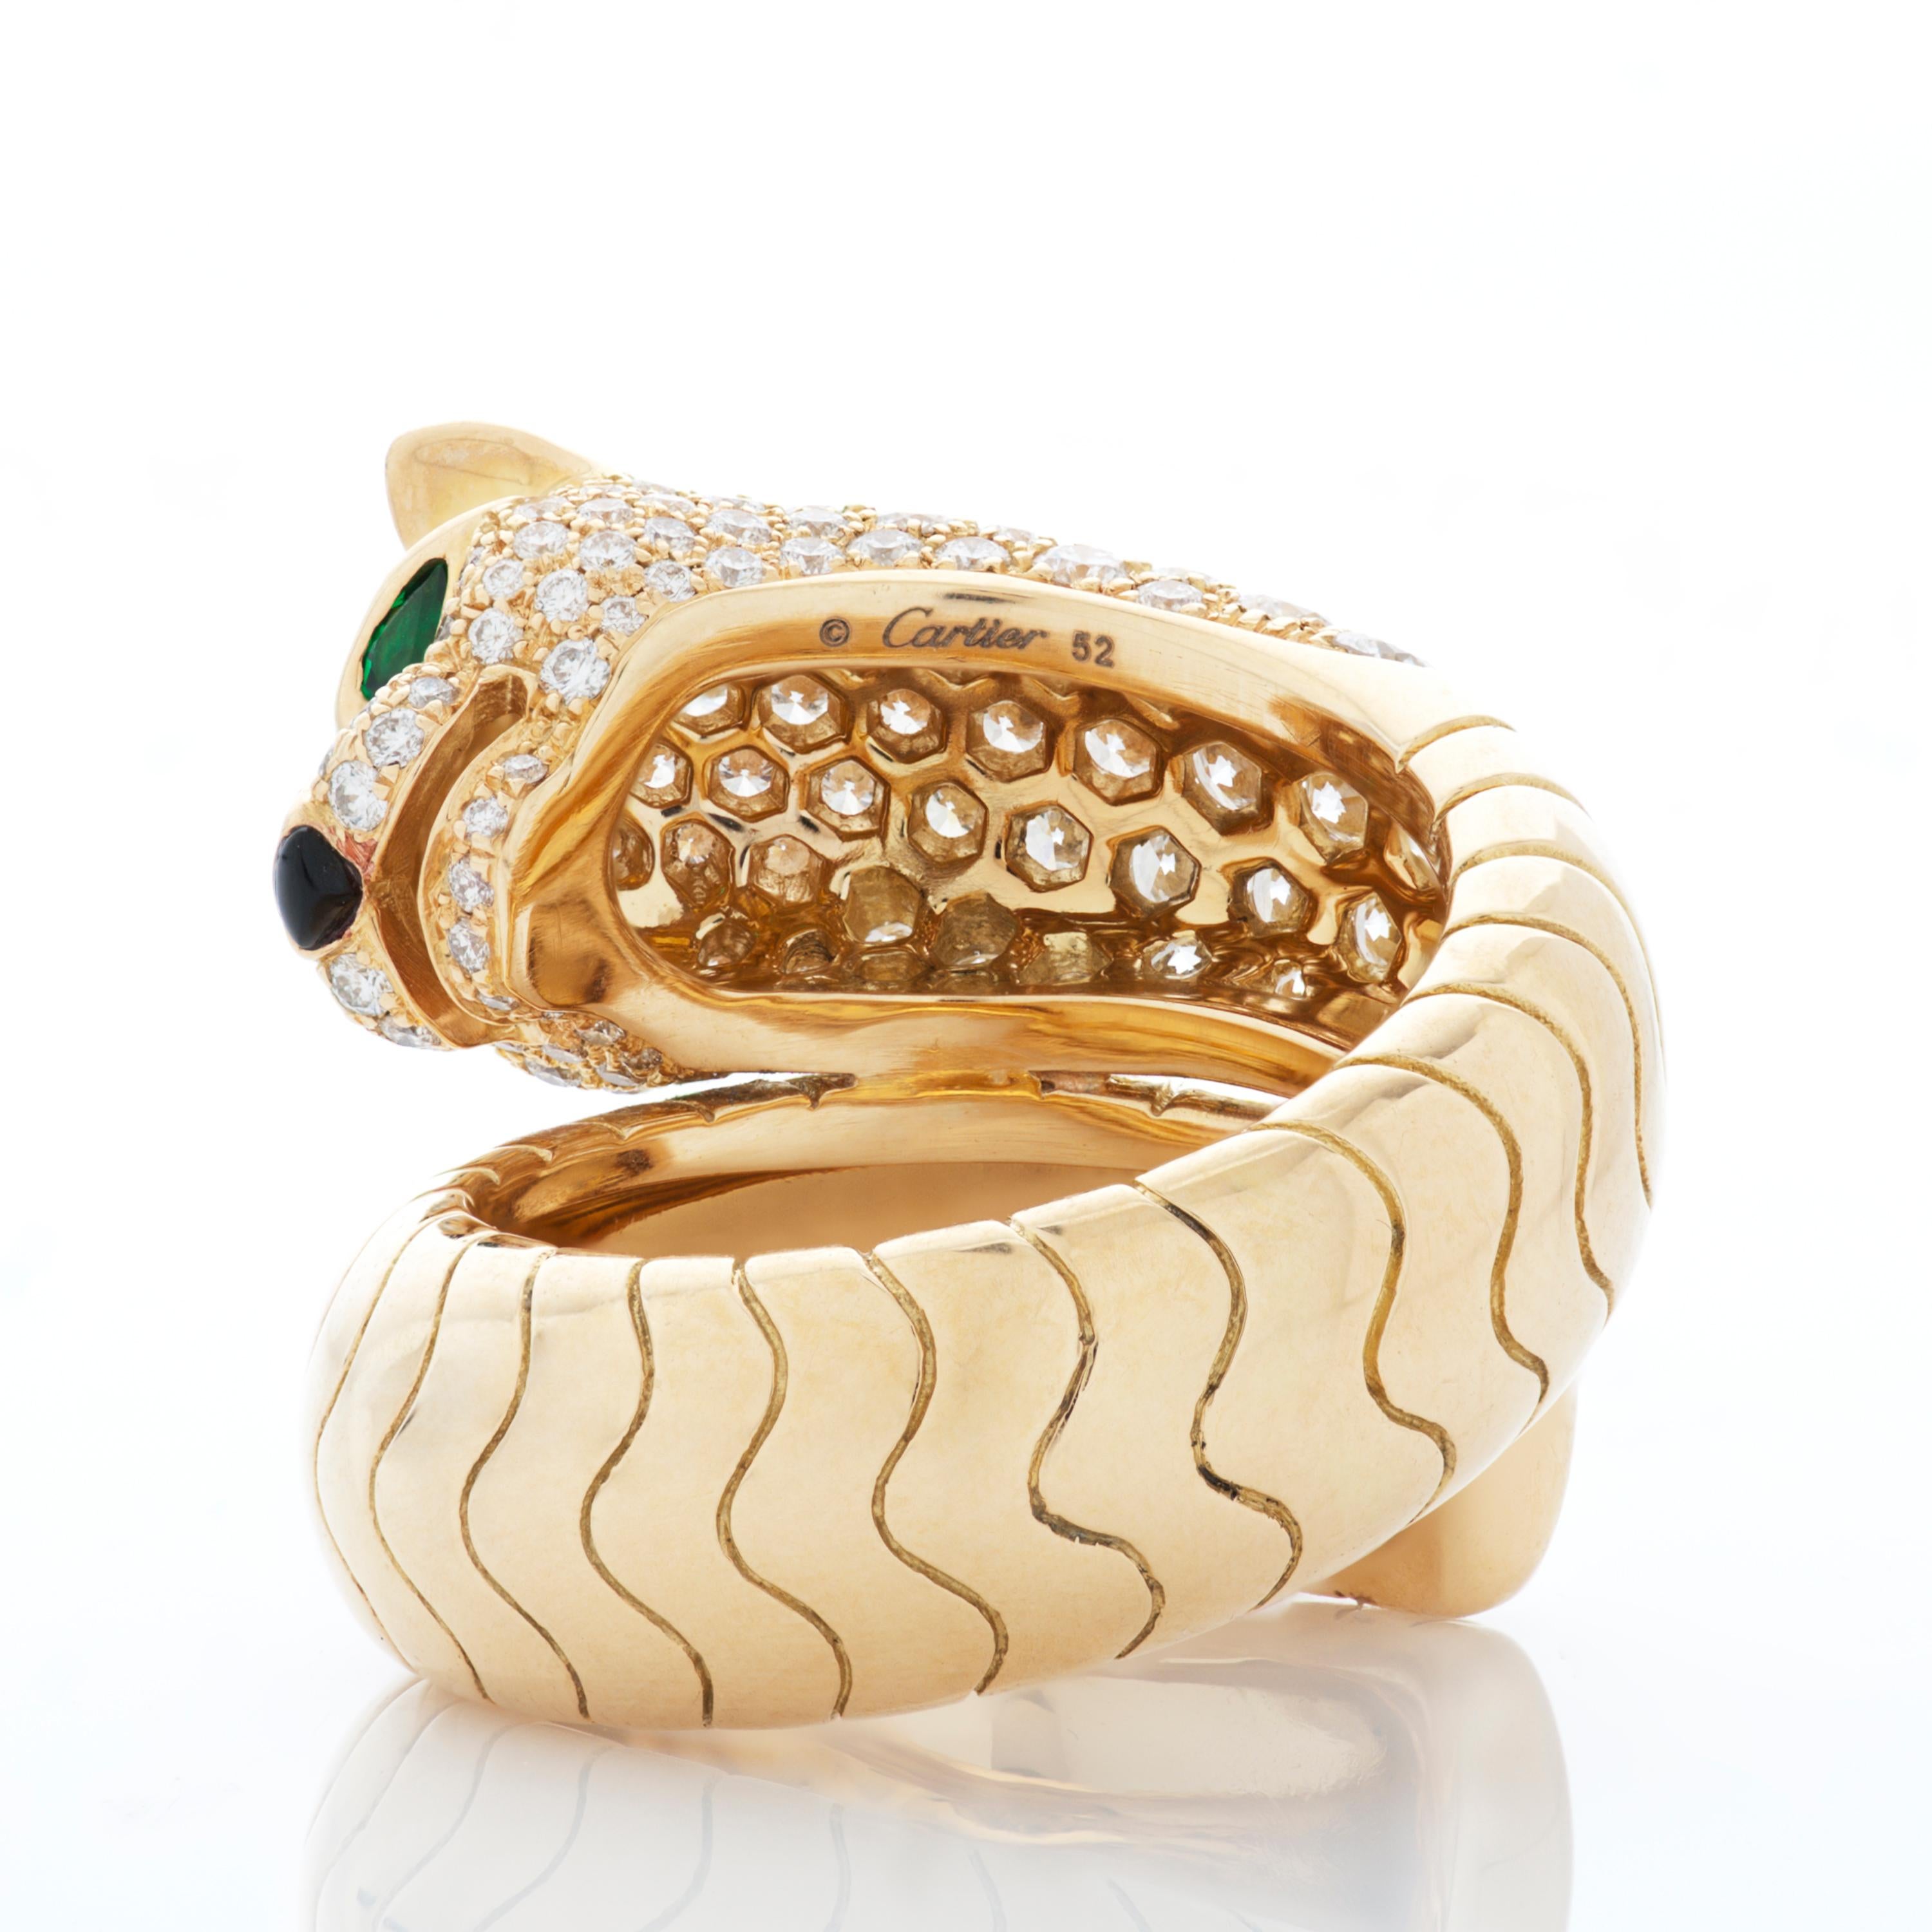 Round Cut Panthere De Cartier Pave Diamond, Emerald & Onyx Bypass Ring in 18k Yellow Gold